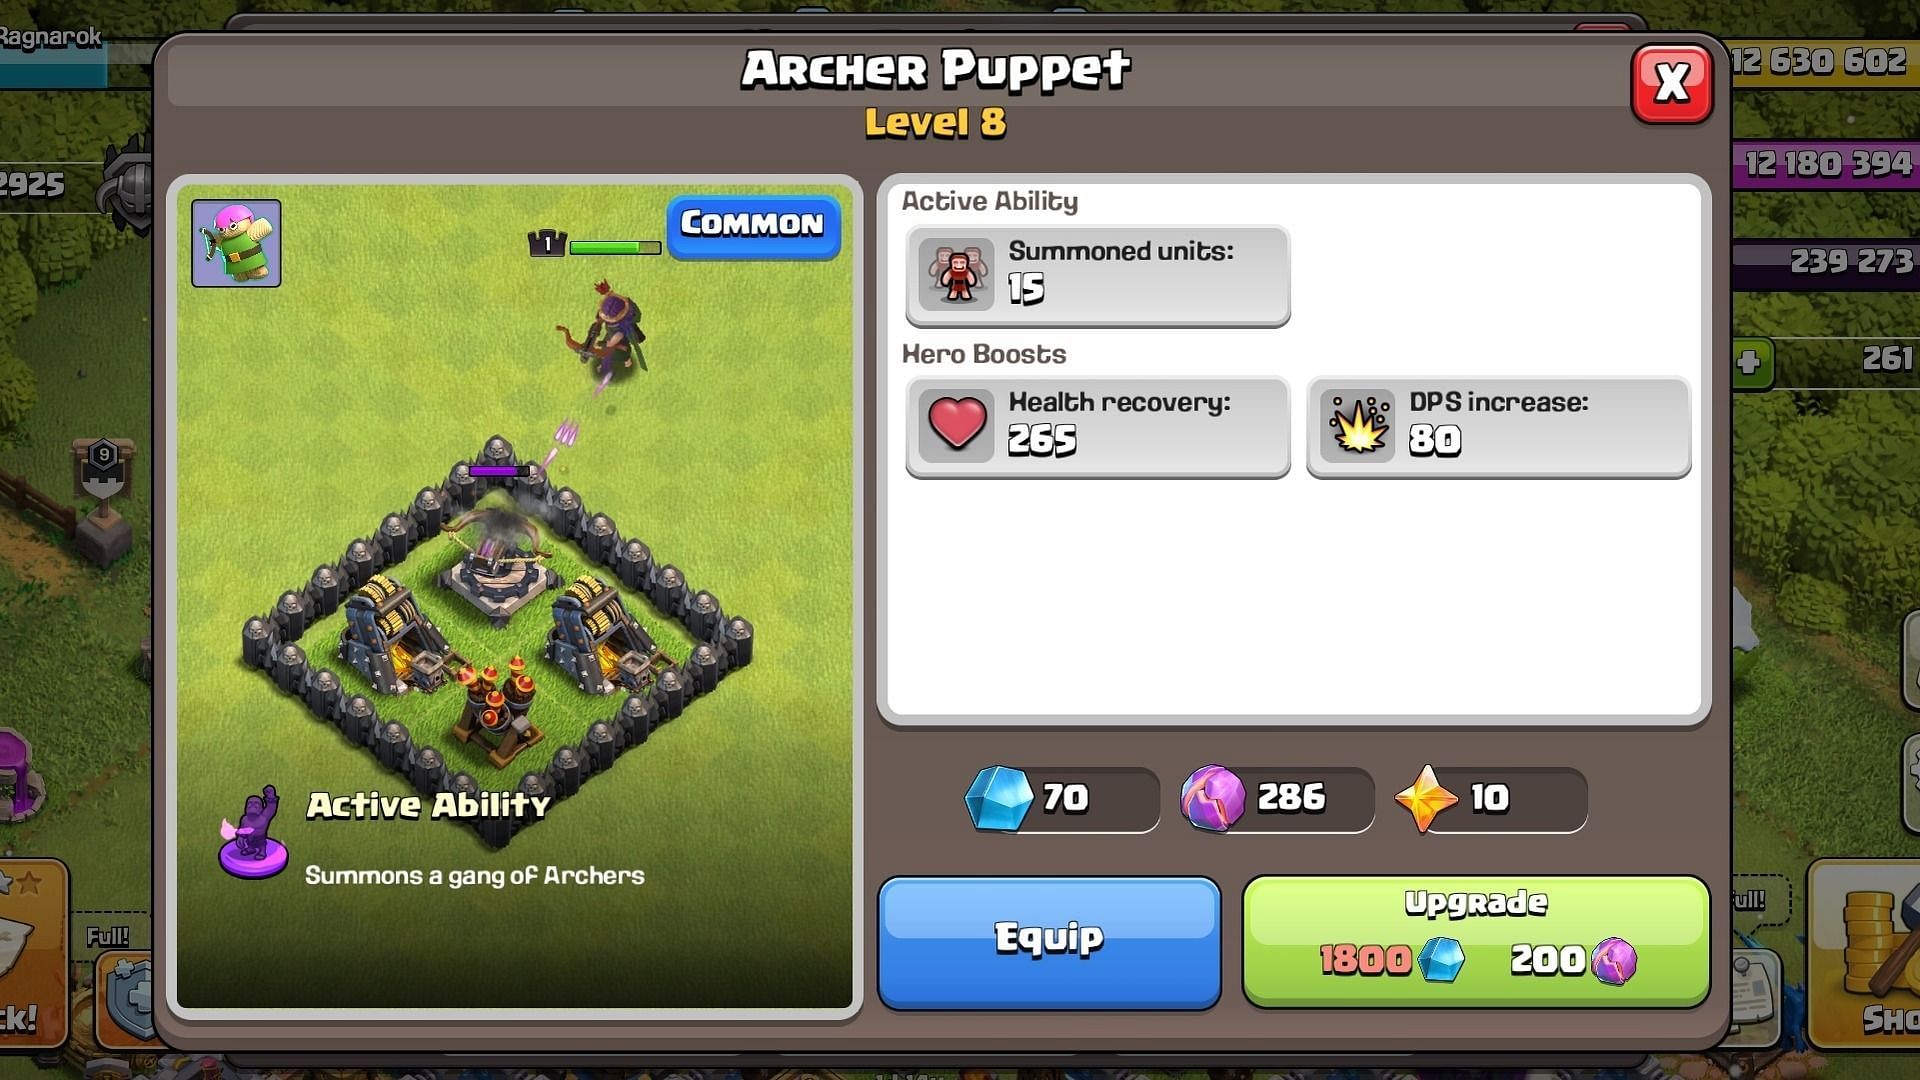 Archer Puppet stats (Image via Supercell)